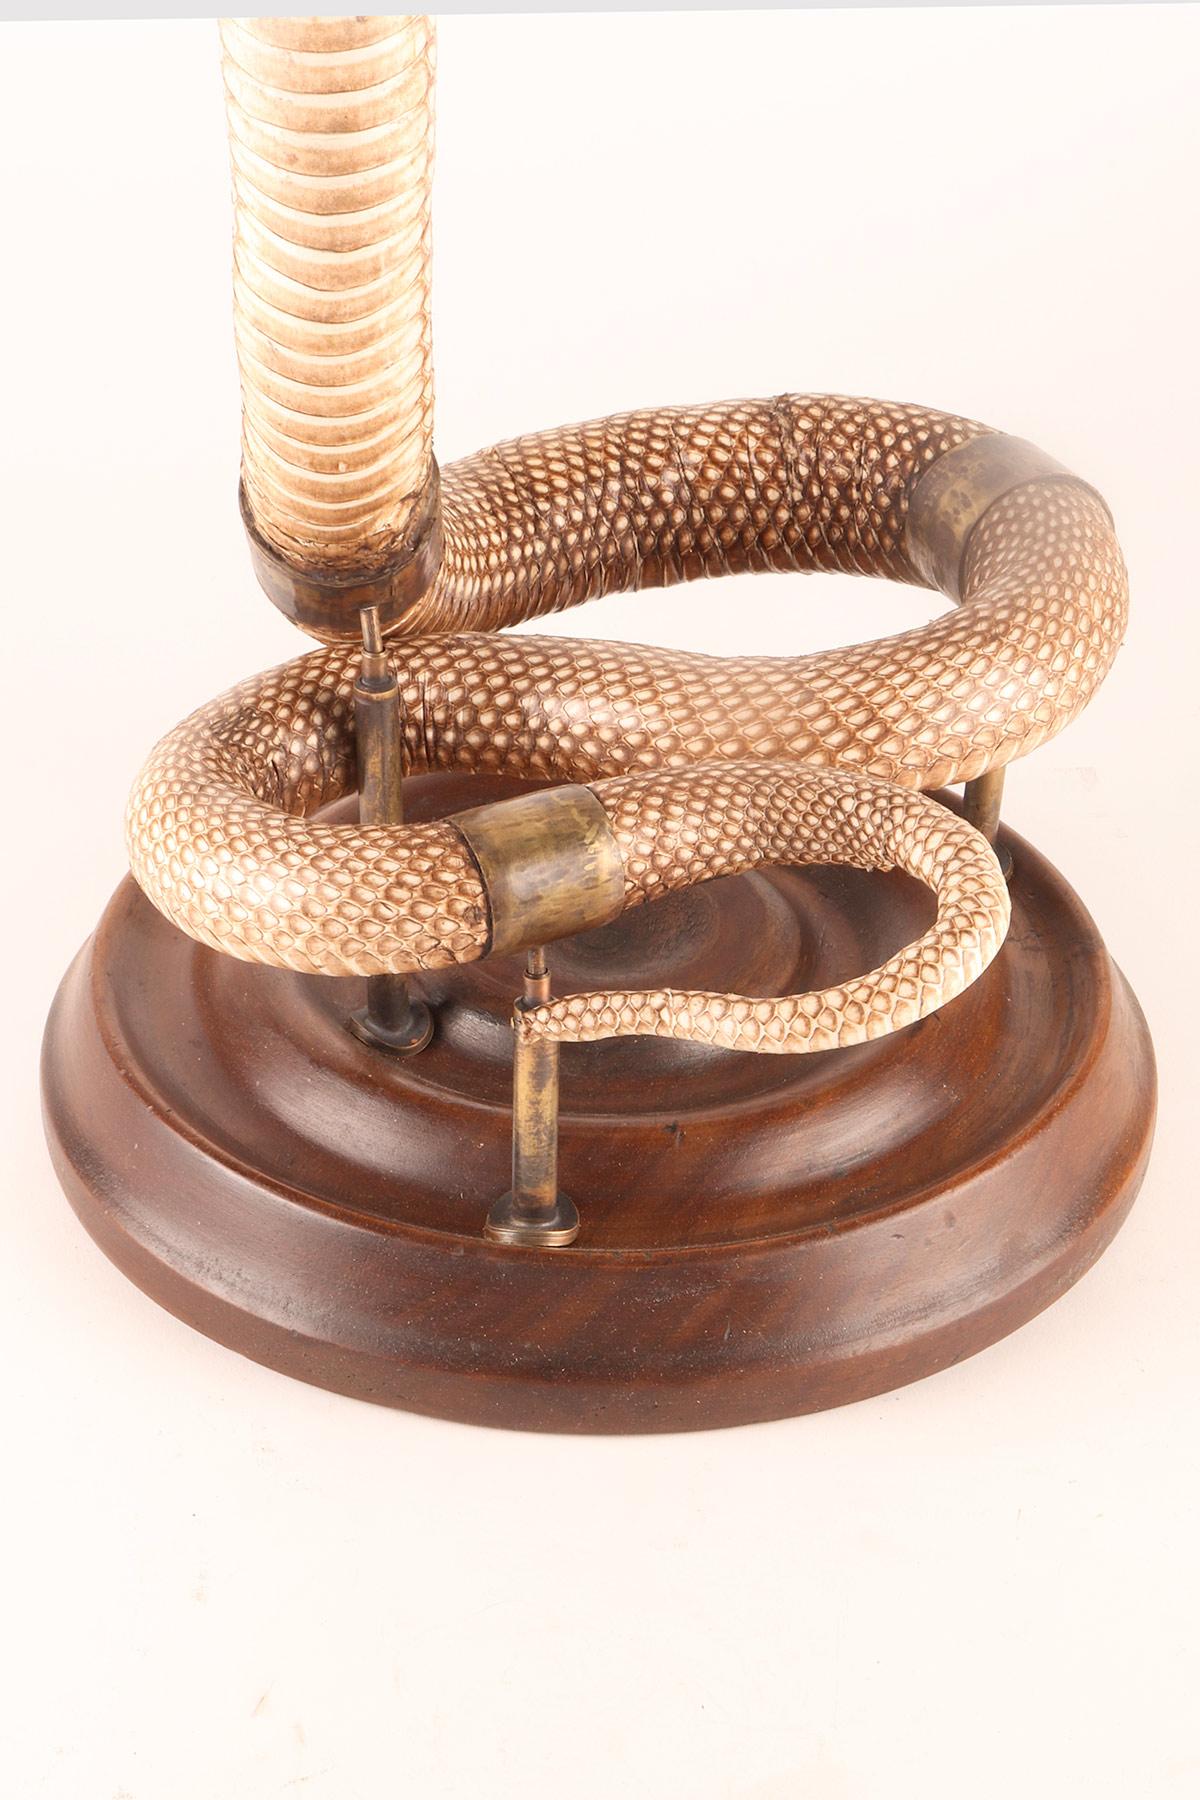 19th Century A specimen of Hemachatus hemachatus snake taxidermy, Italy 1890. For Sale